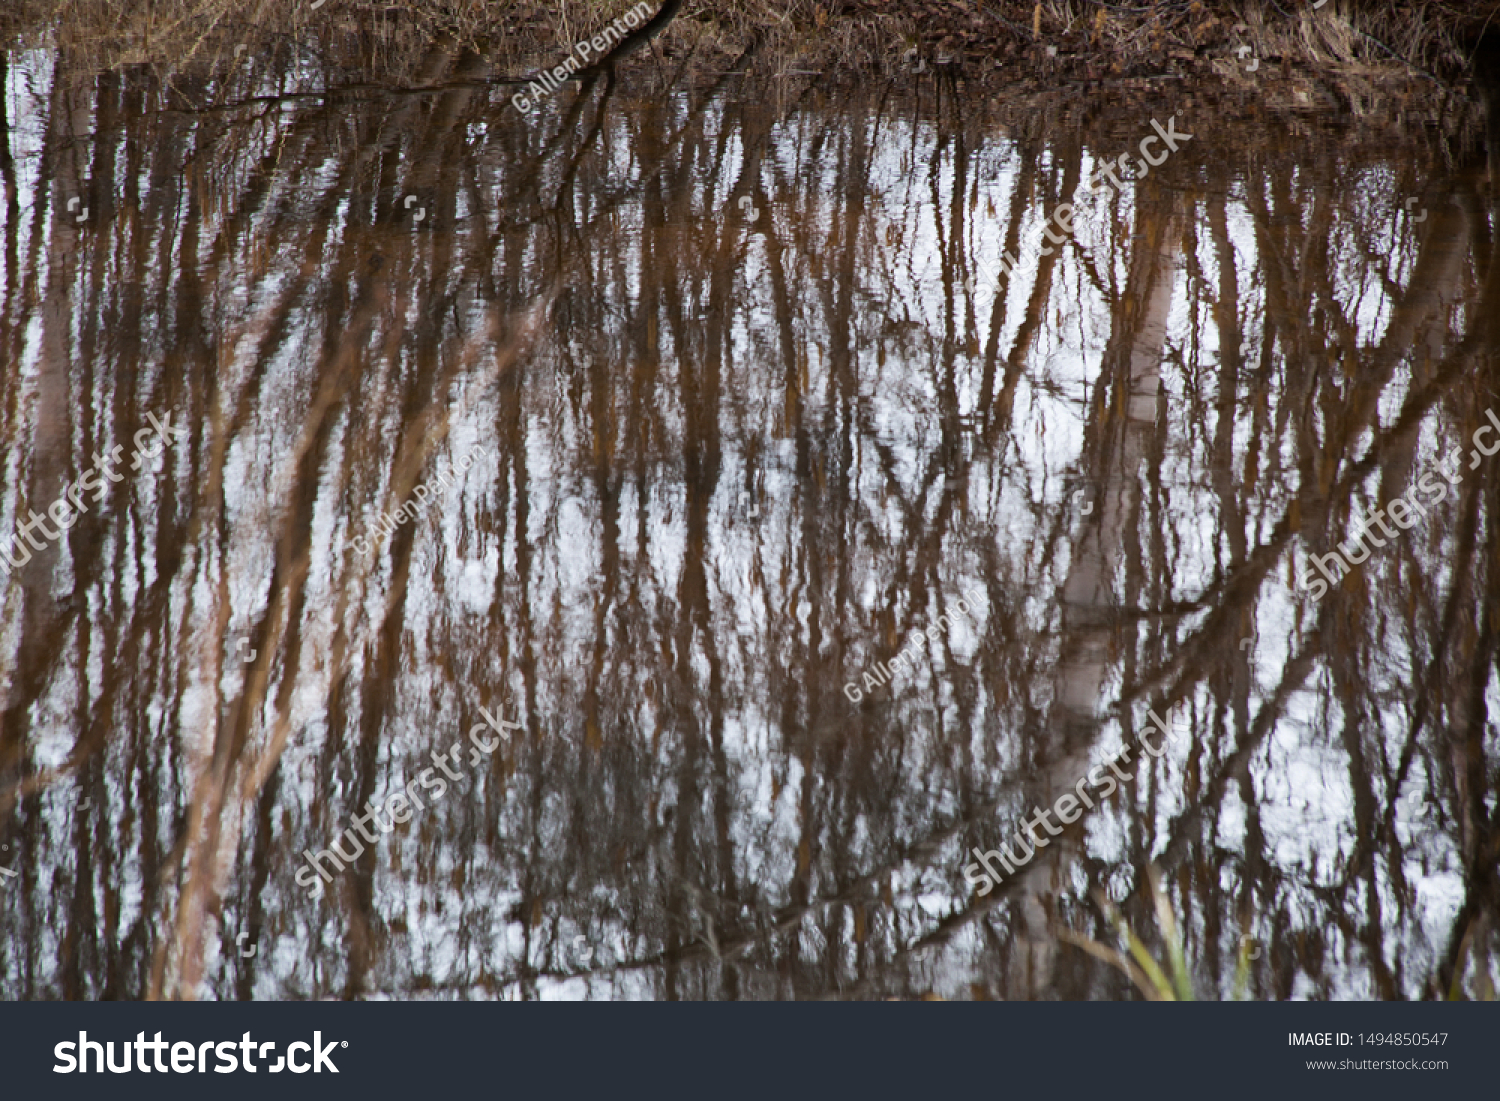 Birch trees reflected in water #1494850547